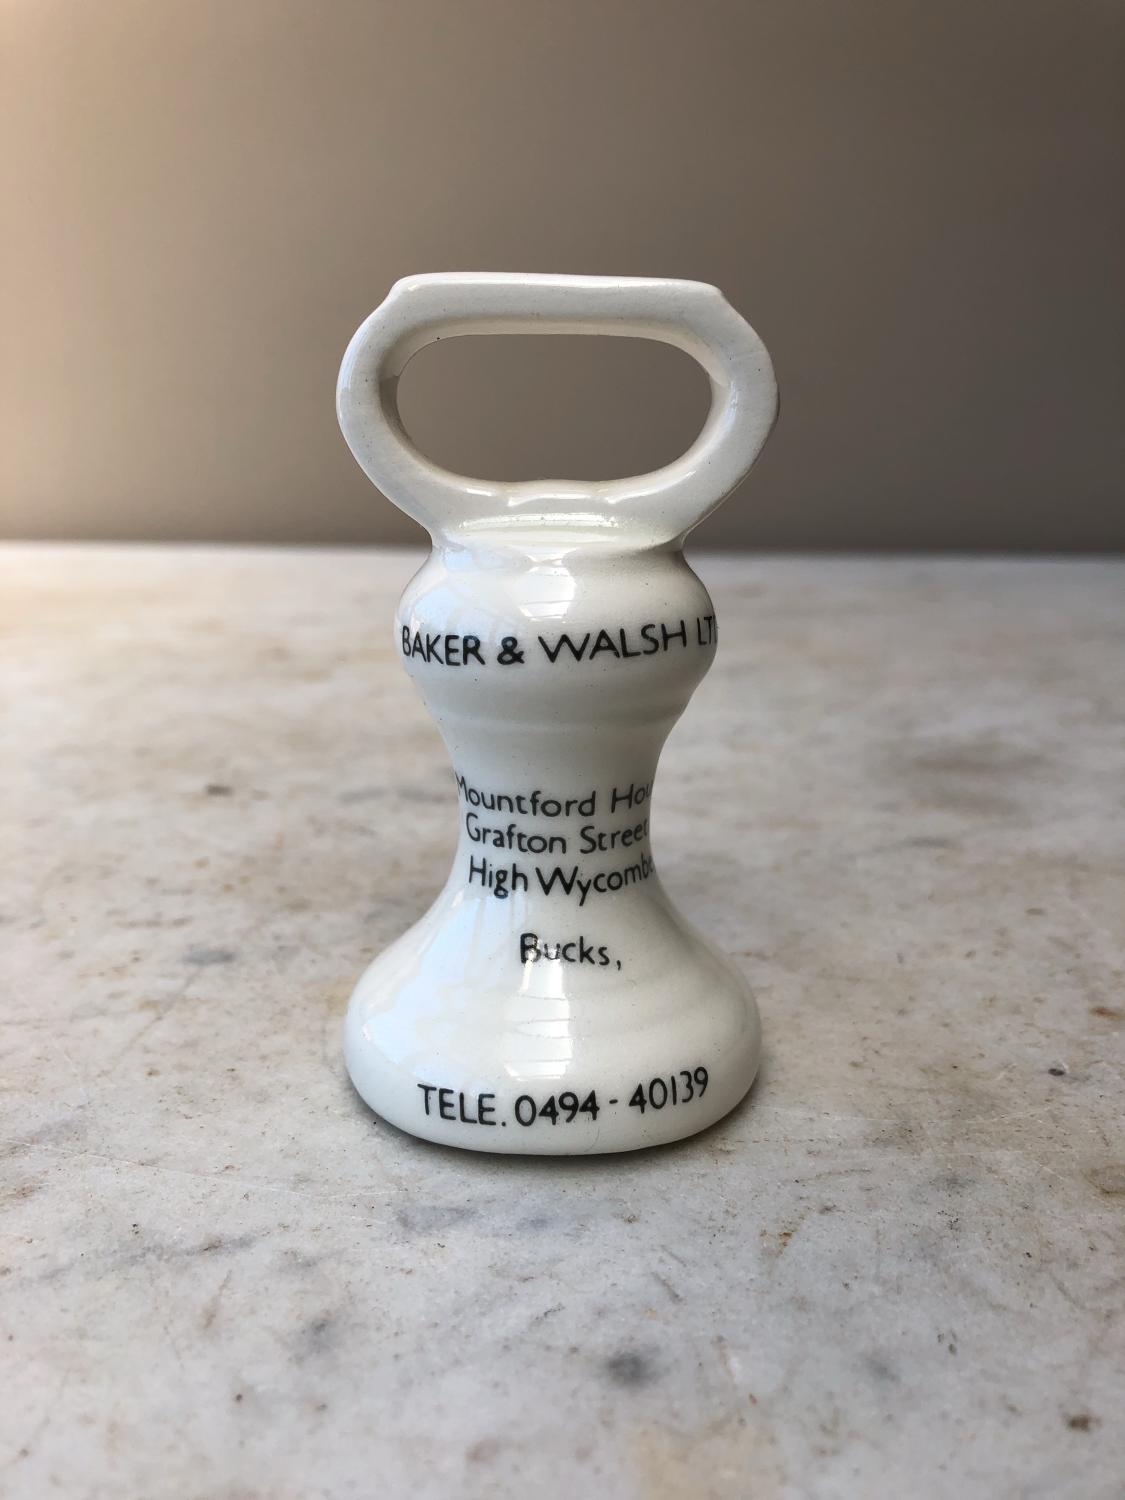 Rare Ceramic Advertising Bell Weight - Scale Makers Baker & Walsh Ltd